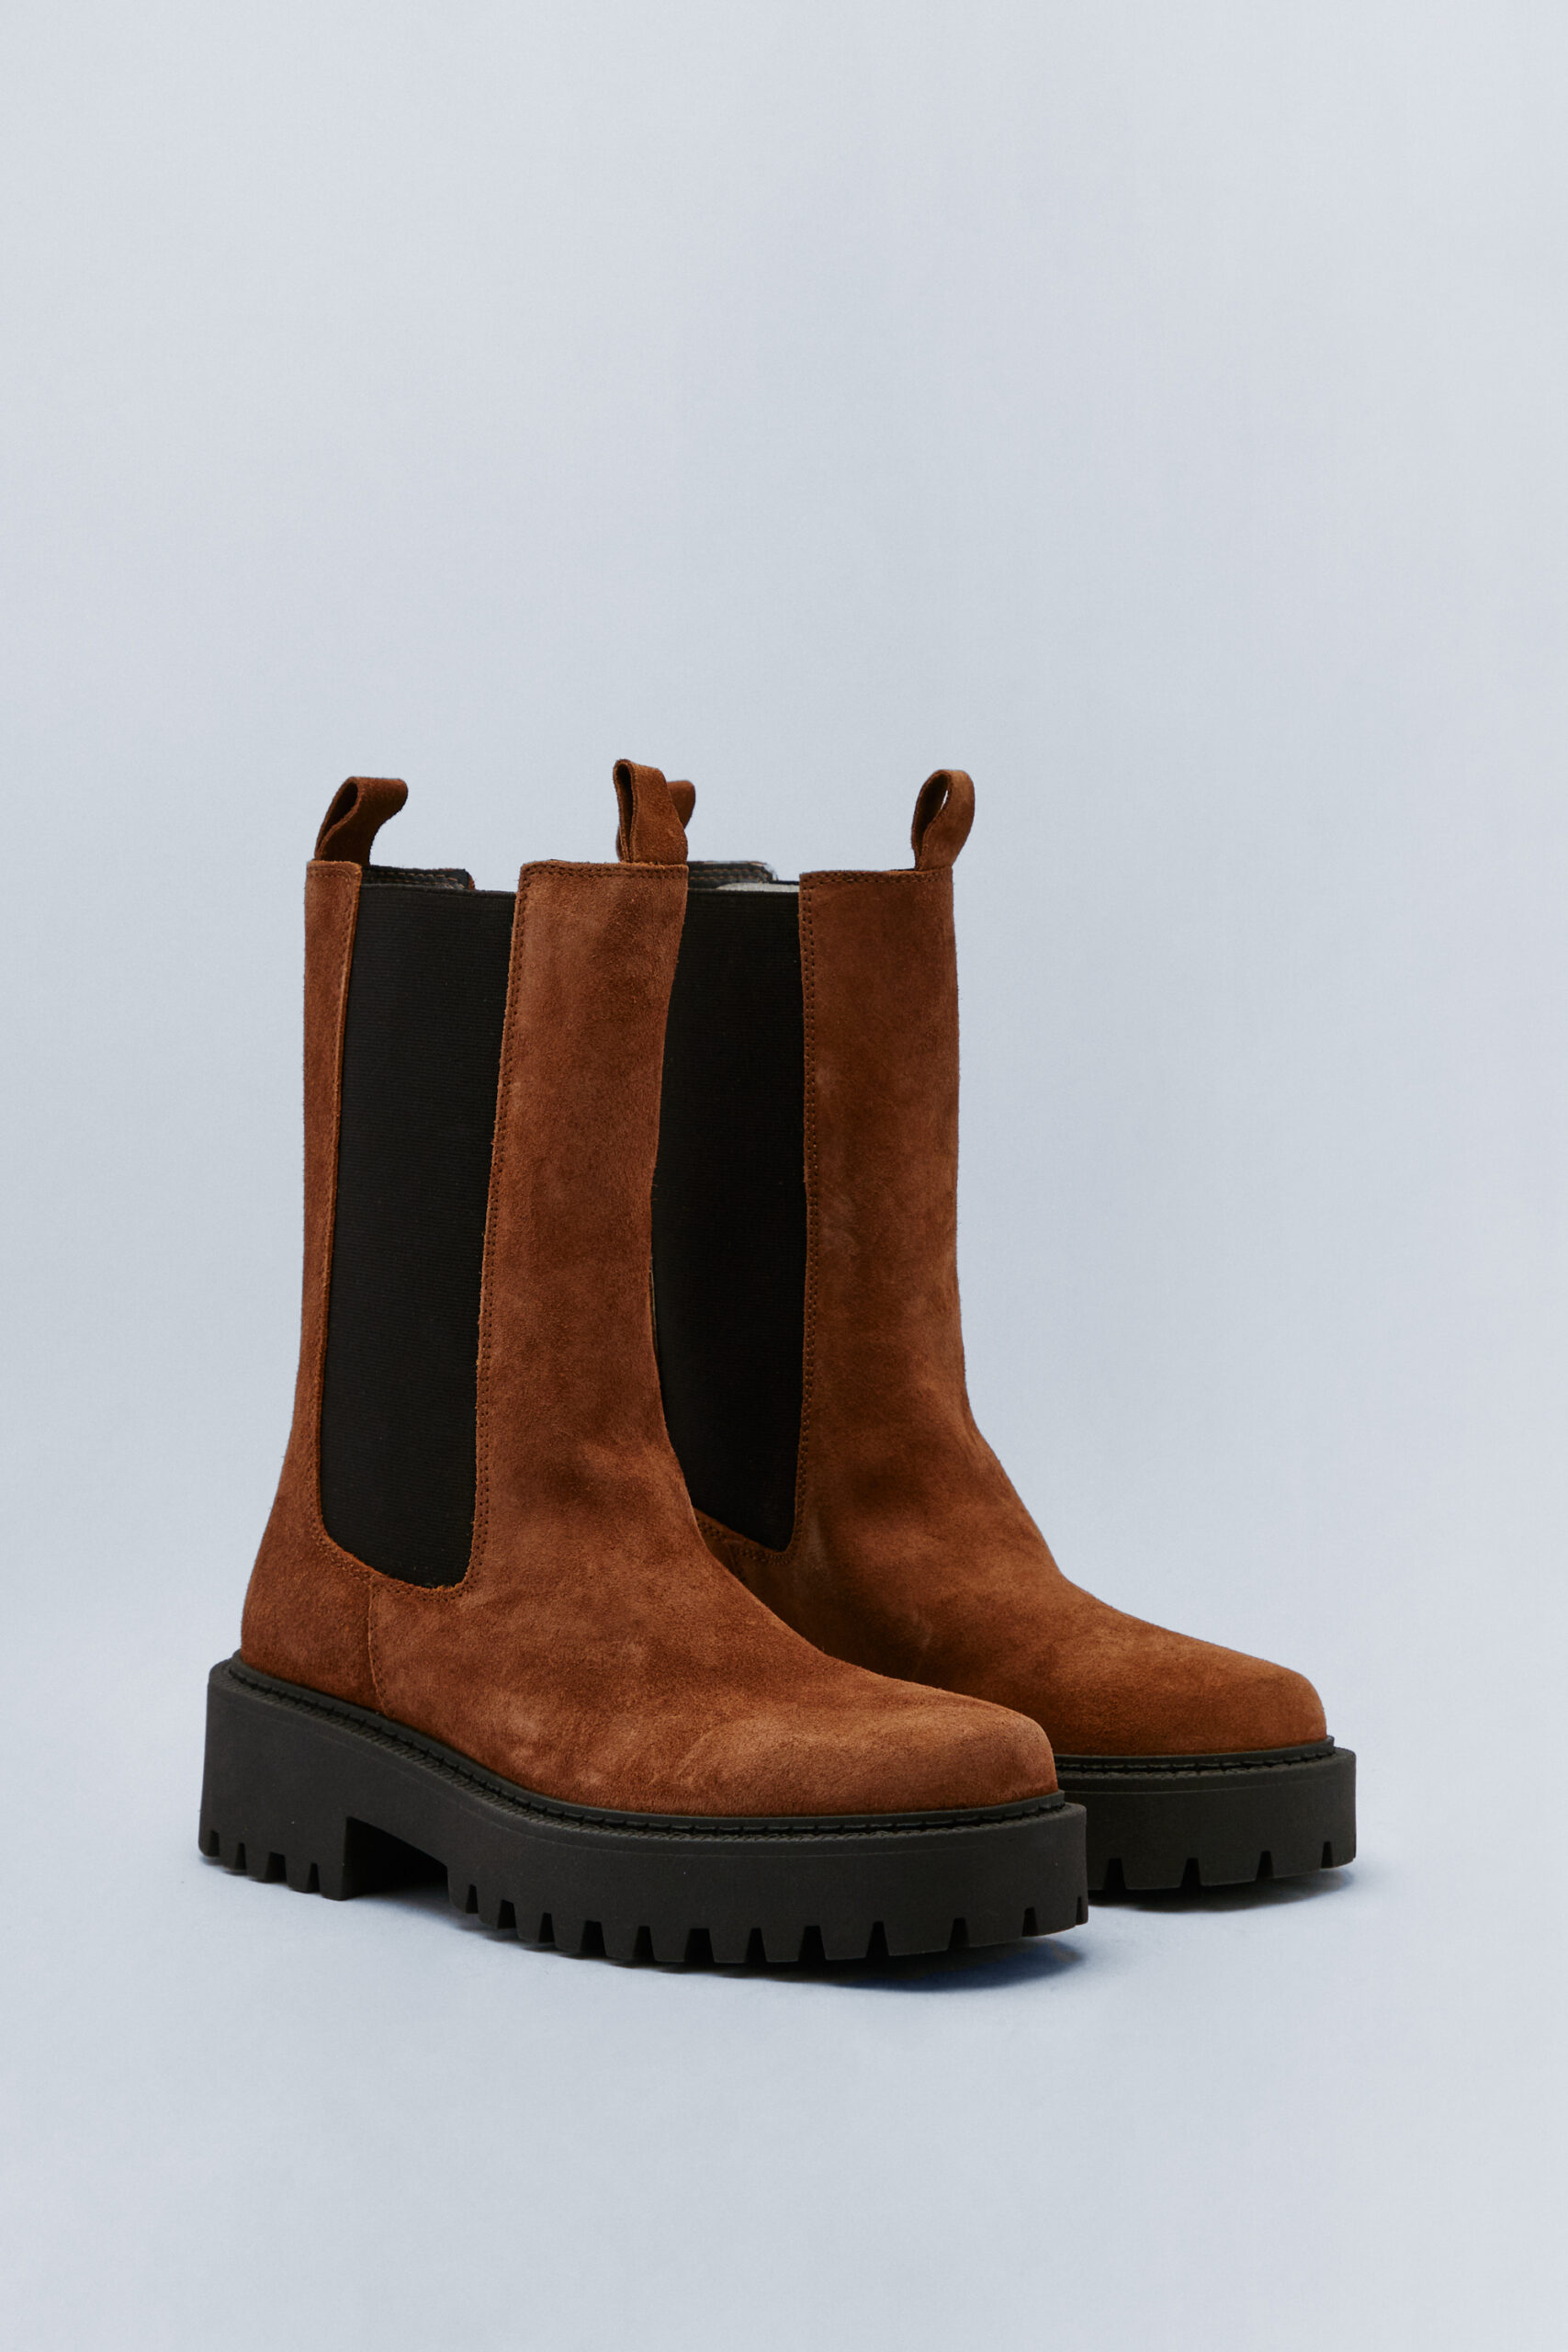 Suede Square Toe Chelsea Boots 